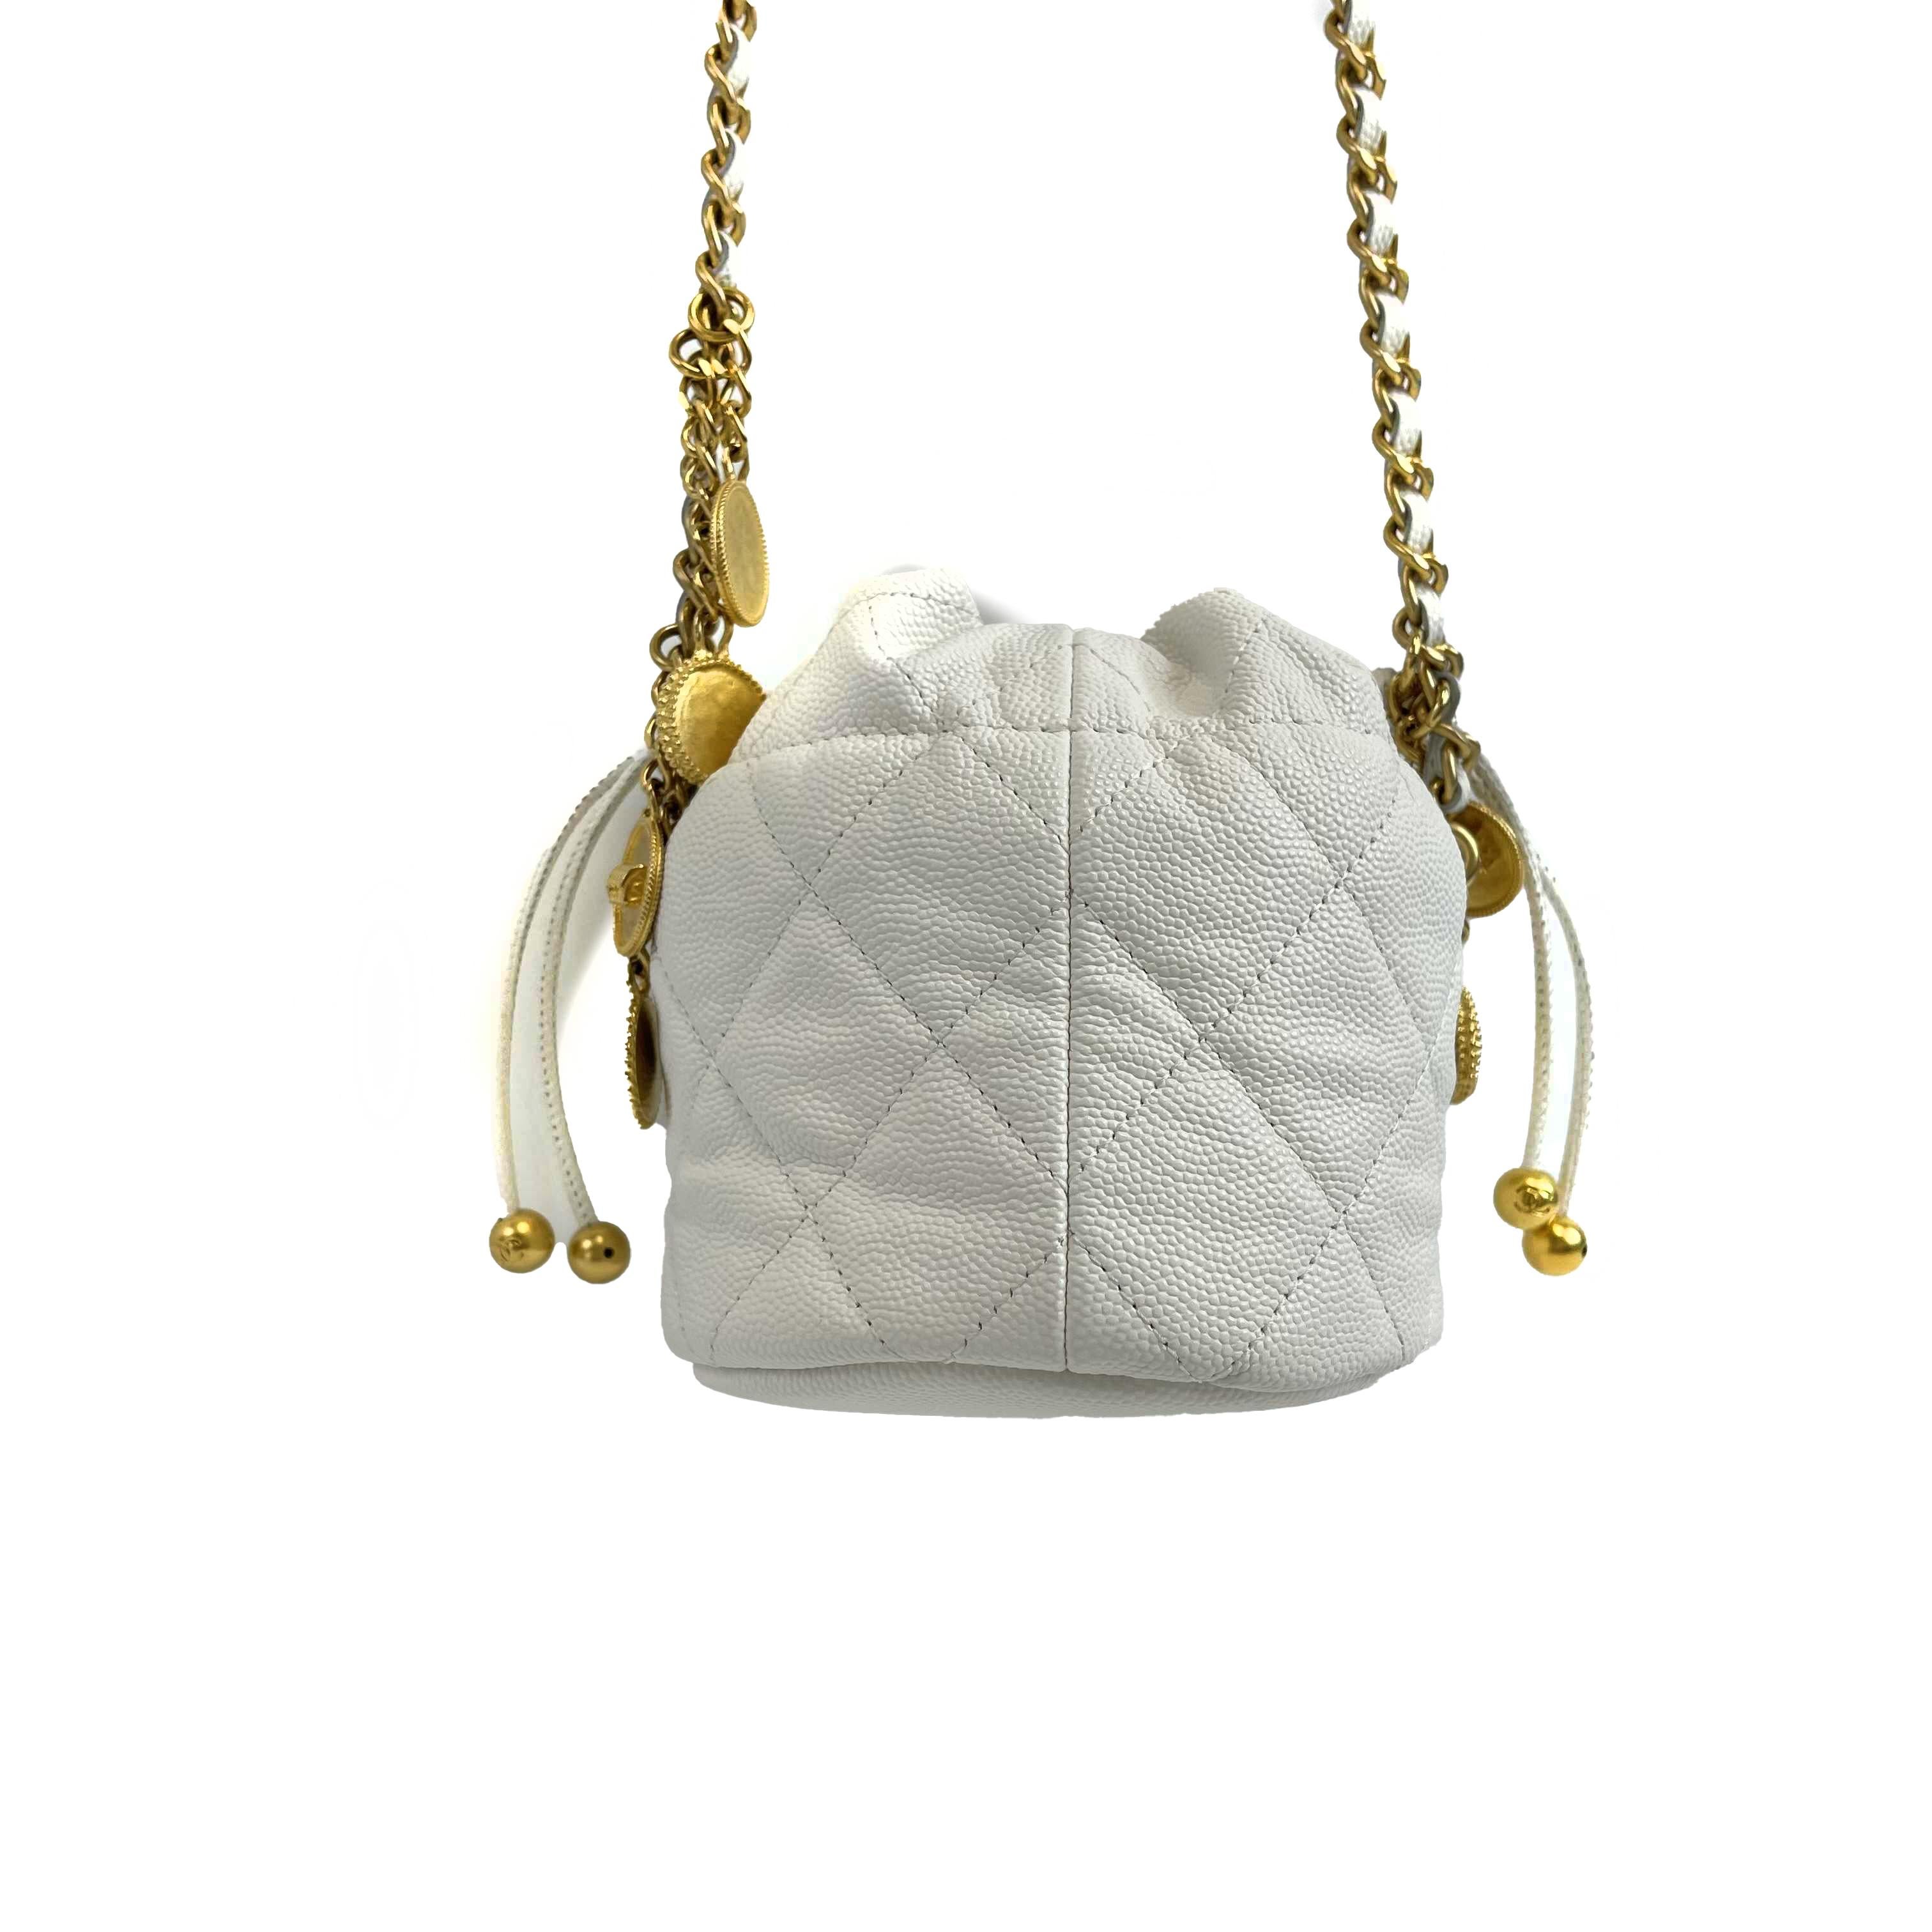 CHANEL - NEW Mini Bucket Bag - White CaviAr Leather / GoLd 10 Coins CC Crossbody

Description

* White quilted, pebbled leather
* Gold hardware
* Gold interlocking CC logo on front
* White leather and chain intertwined shoulder strap
* Ten gold